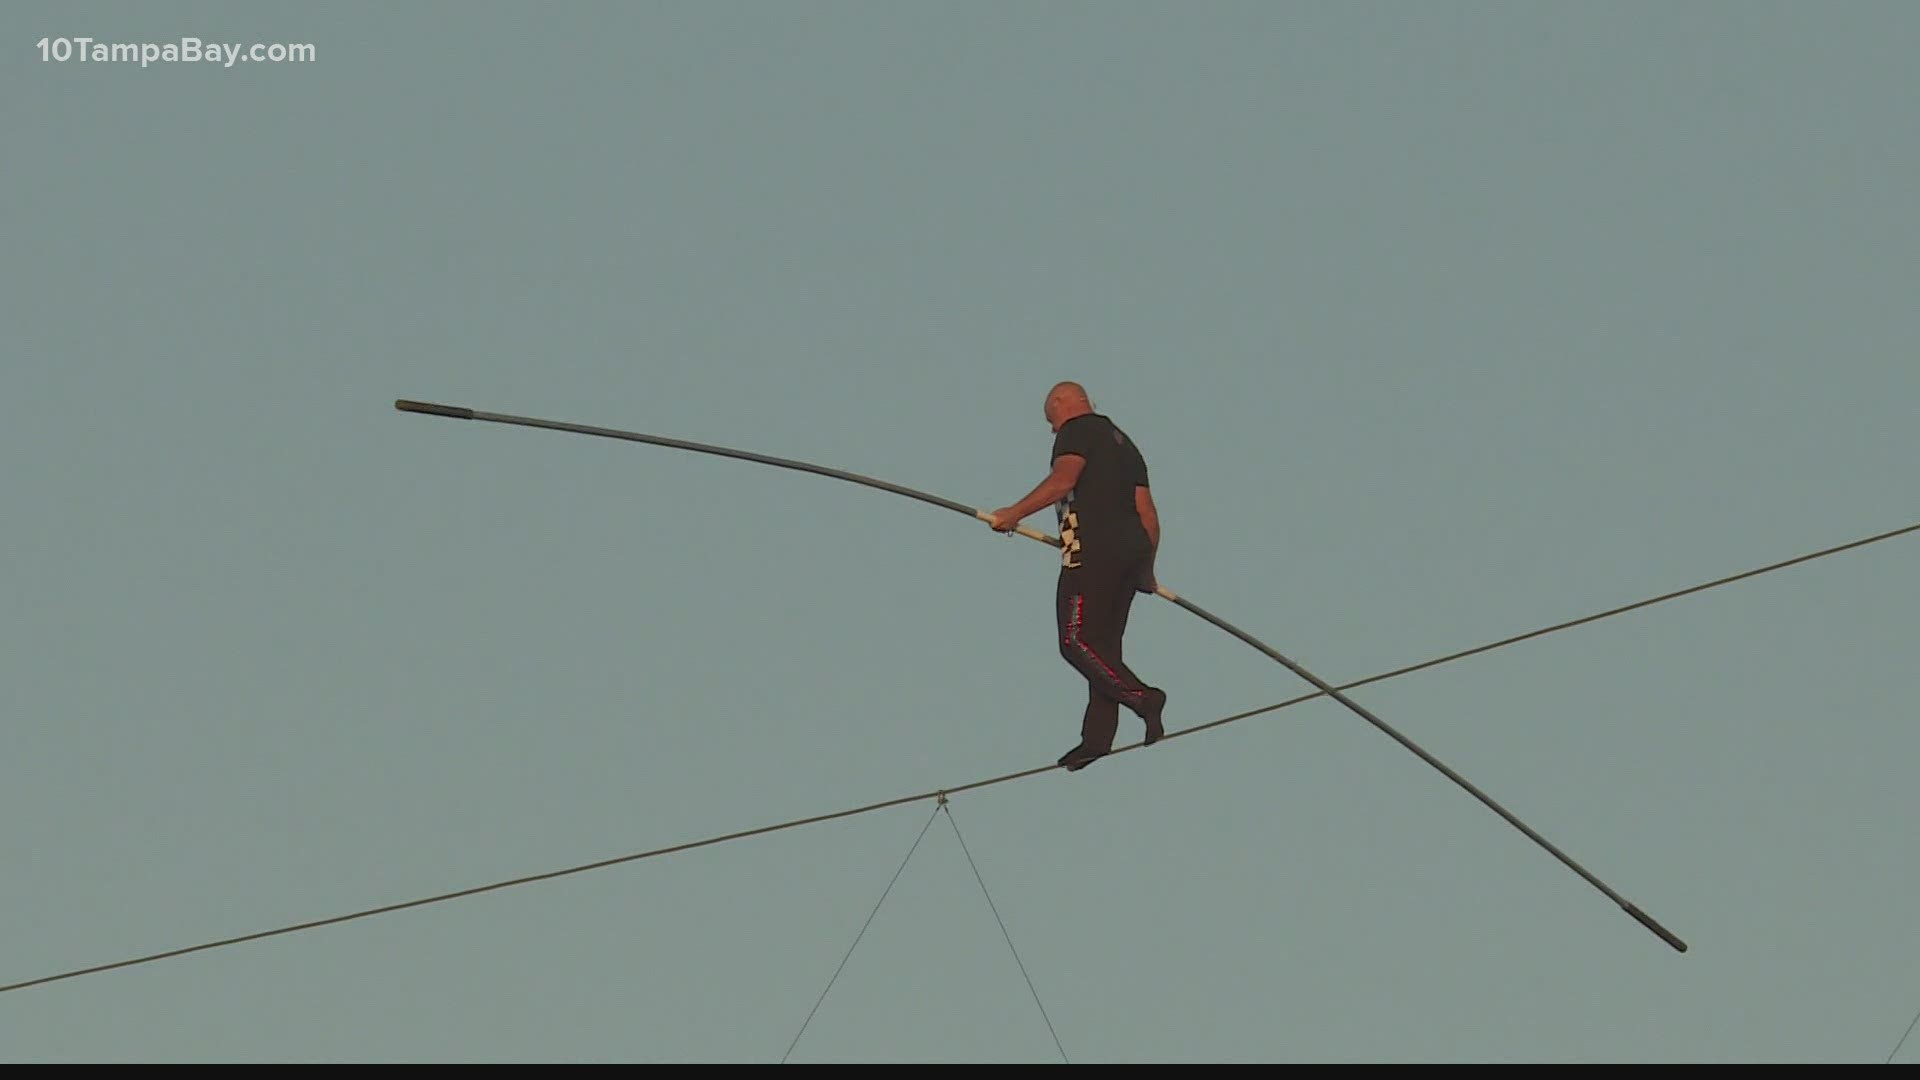 The 11-time Guinness World Record holder will take the high wire along with his wife.